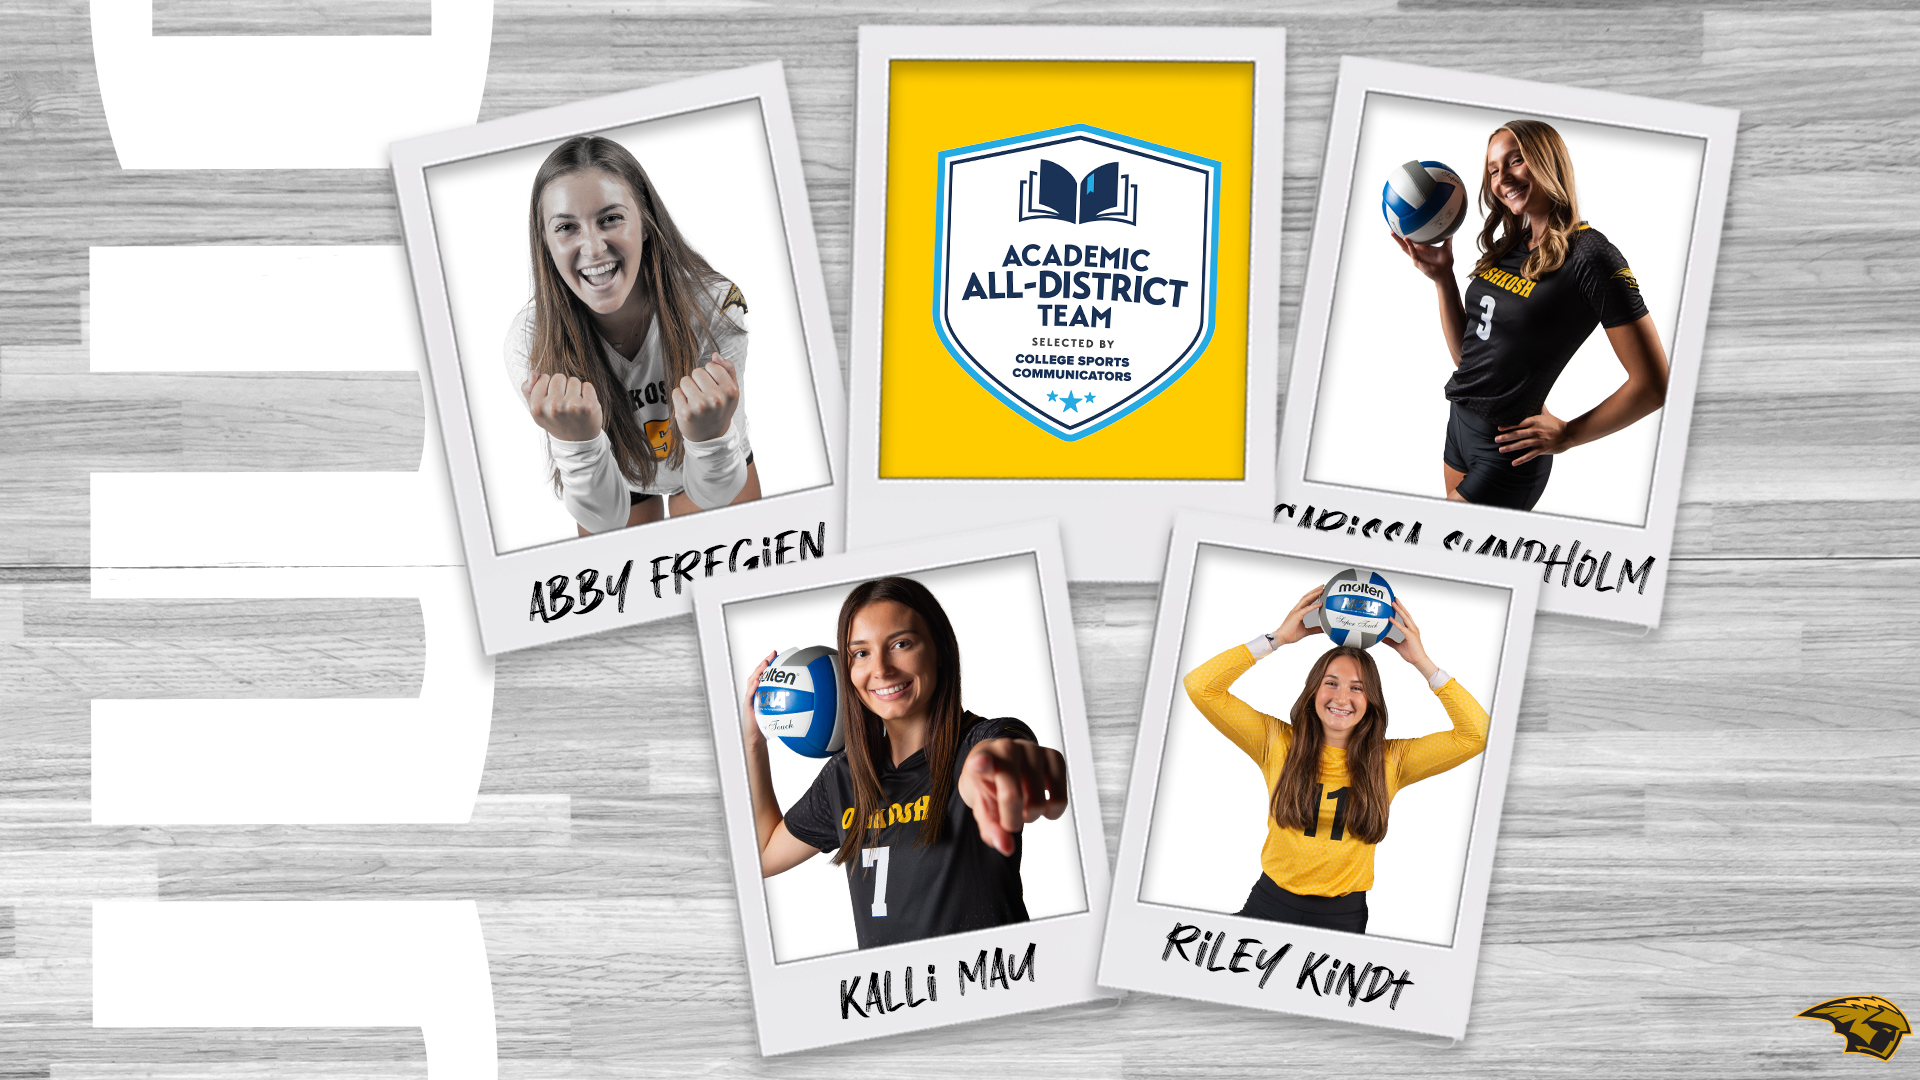 Four Titans Earn CSC Academic All-District